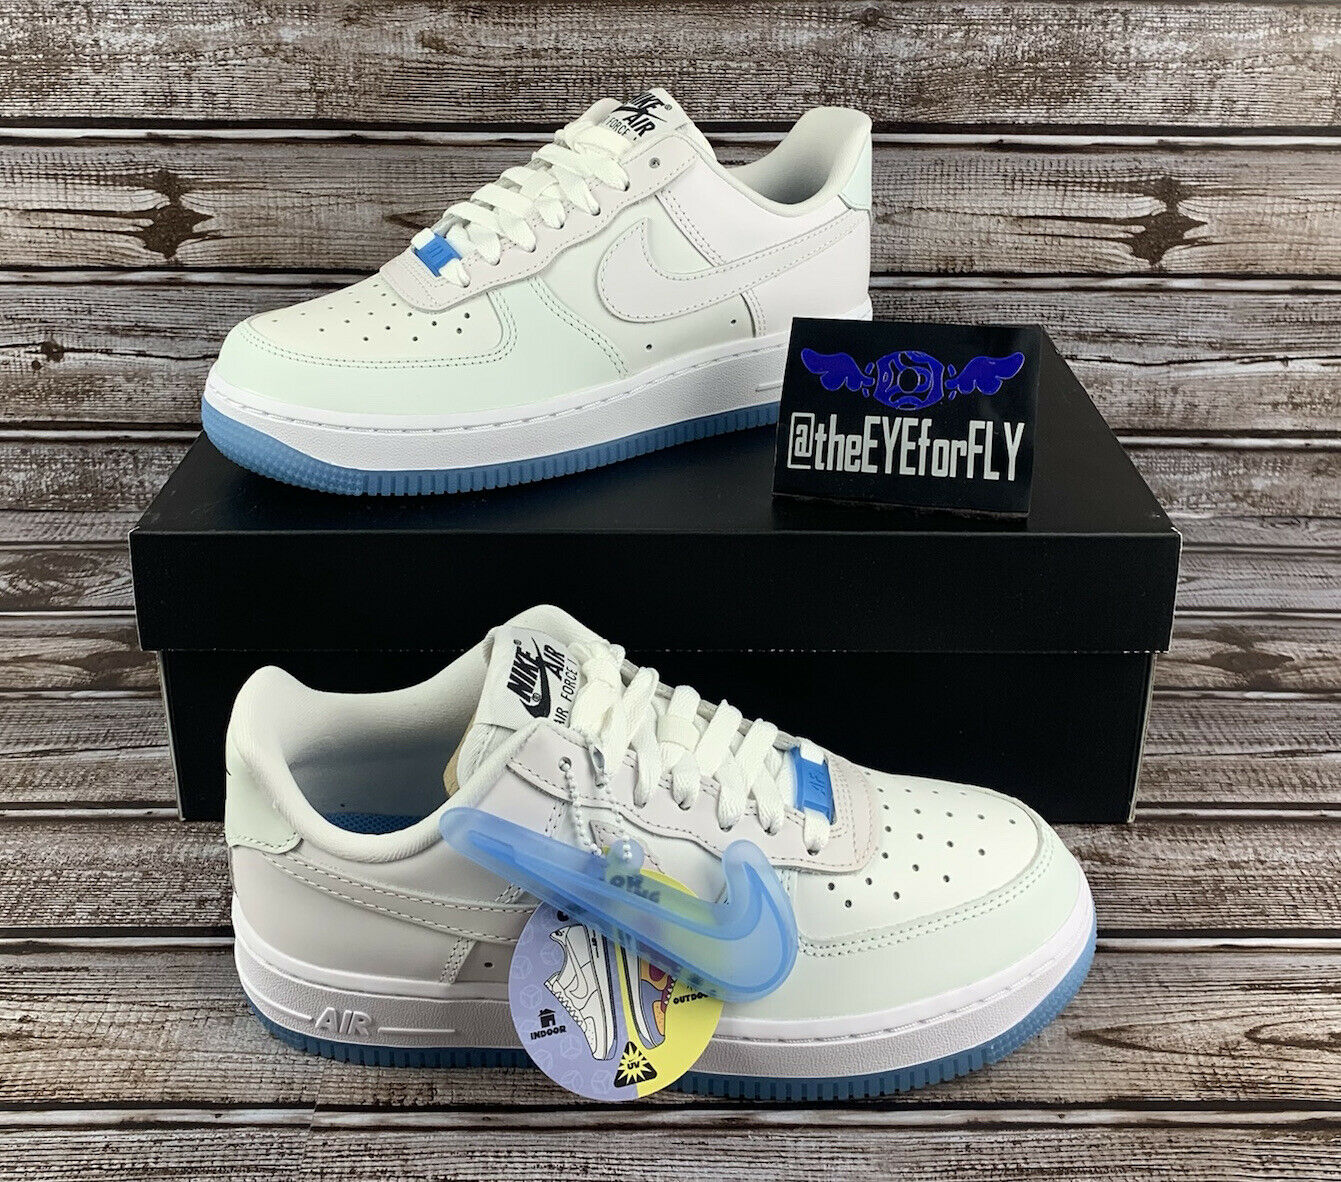 Nike Air Force 1 '07 UV Reactive Color Changing Shoes DA8301-100 Women’s 6.5 NEW